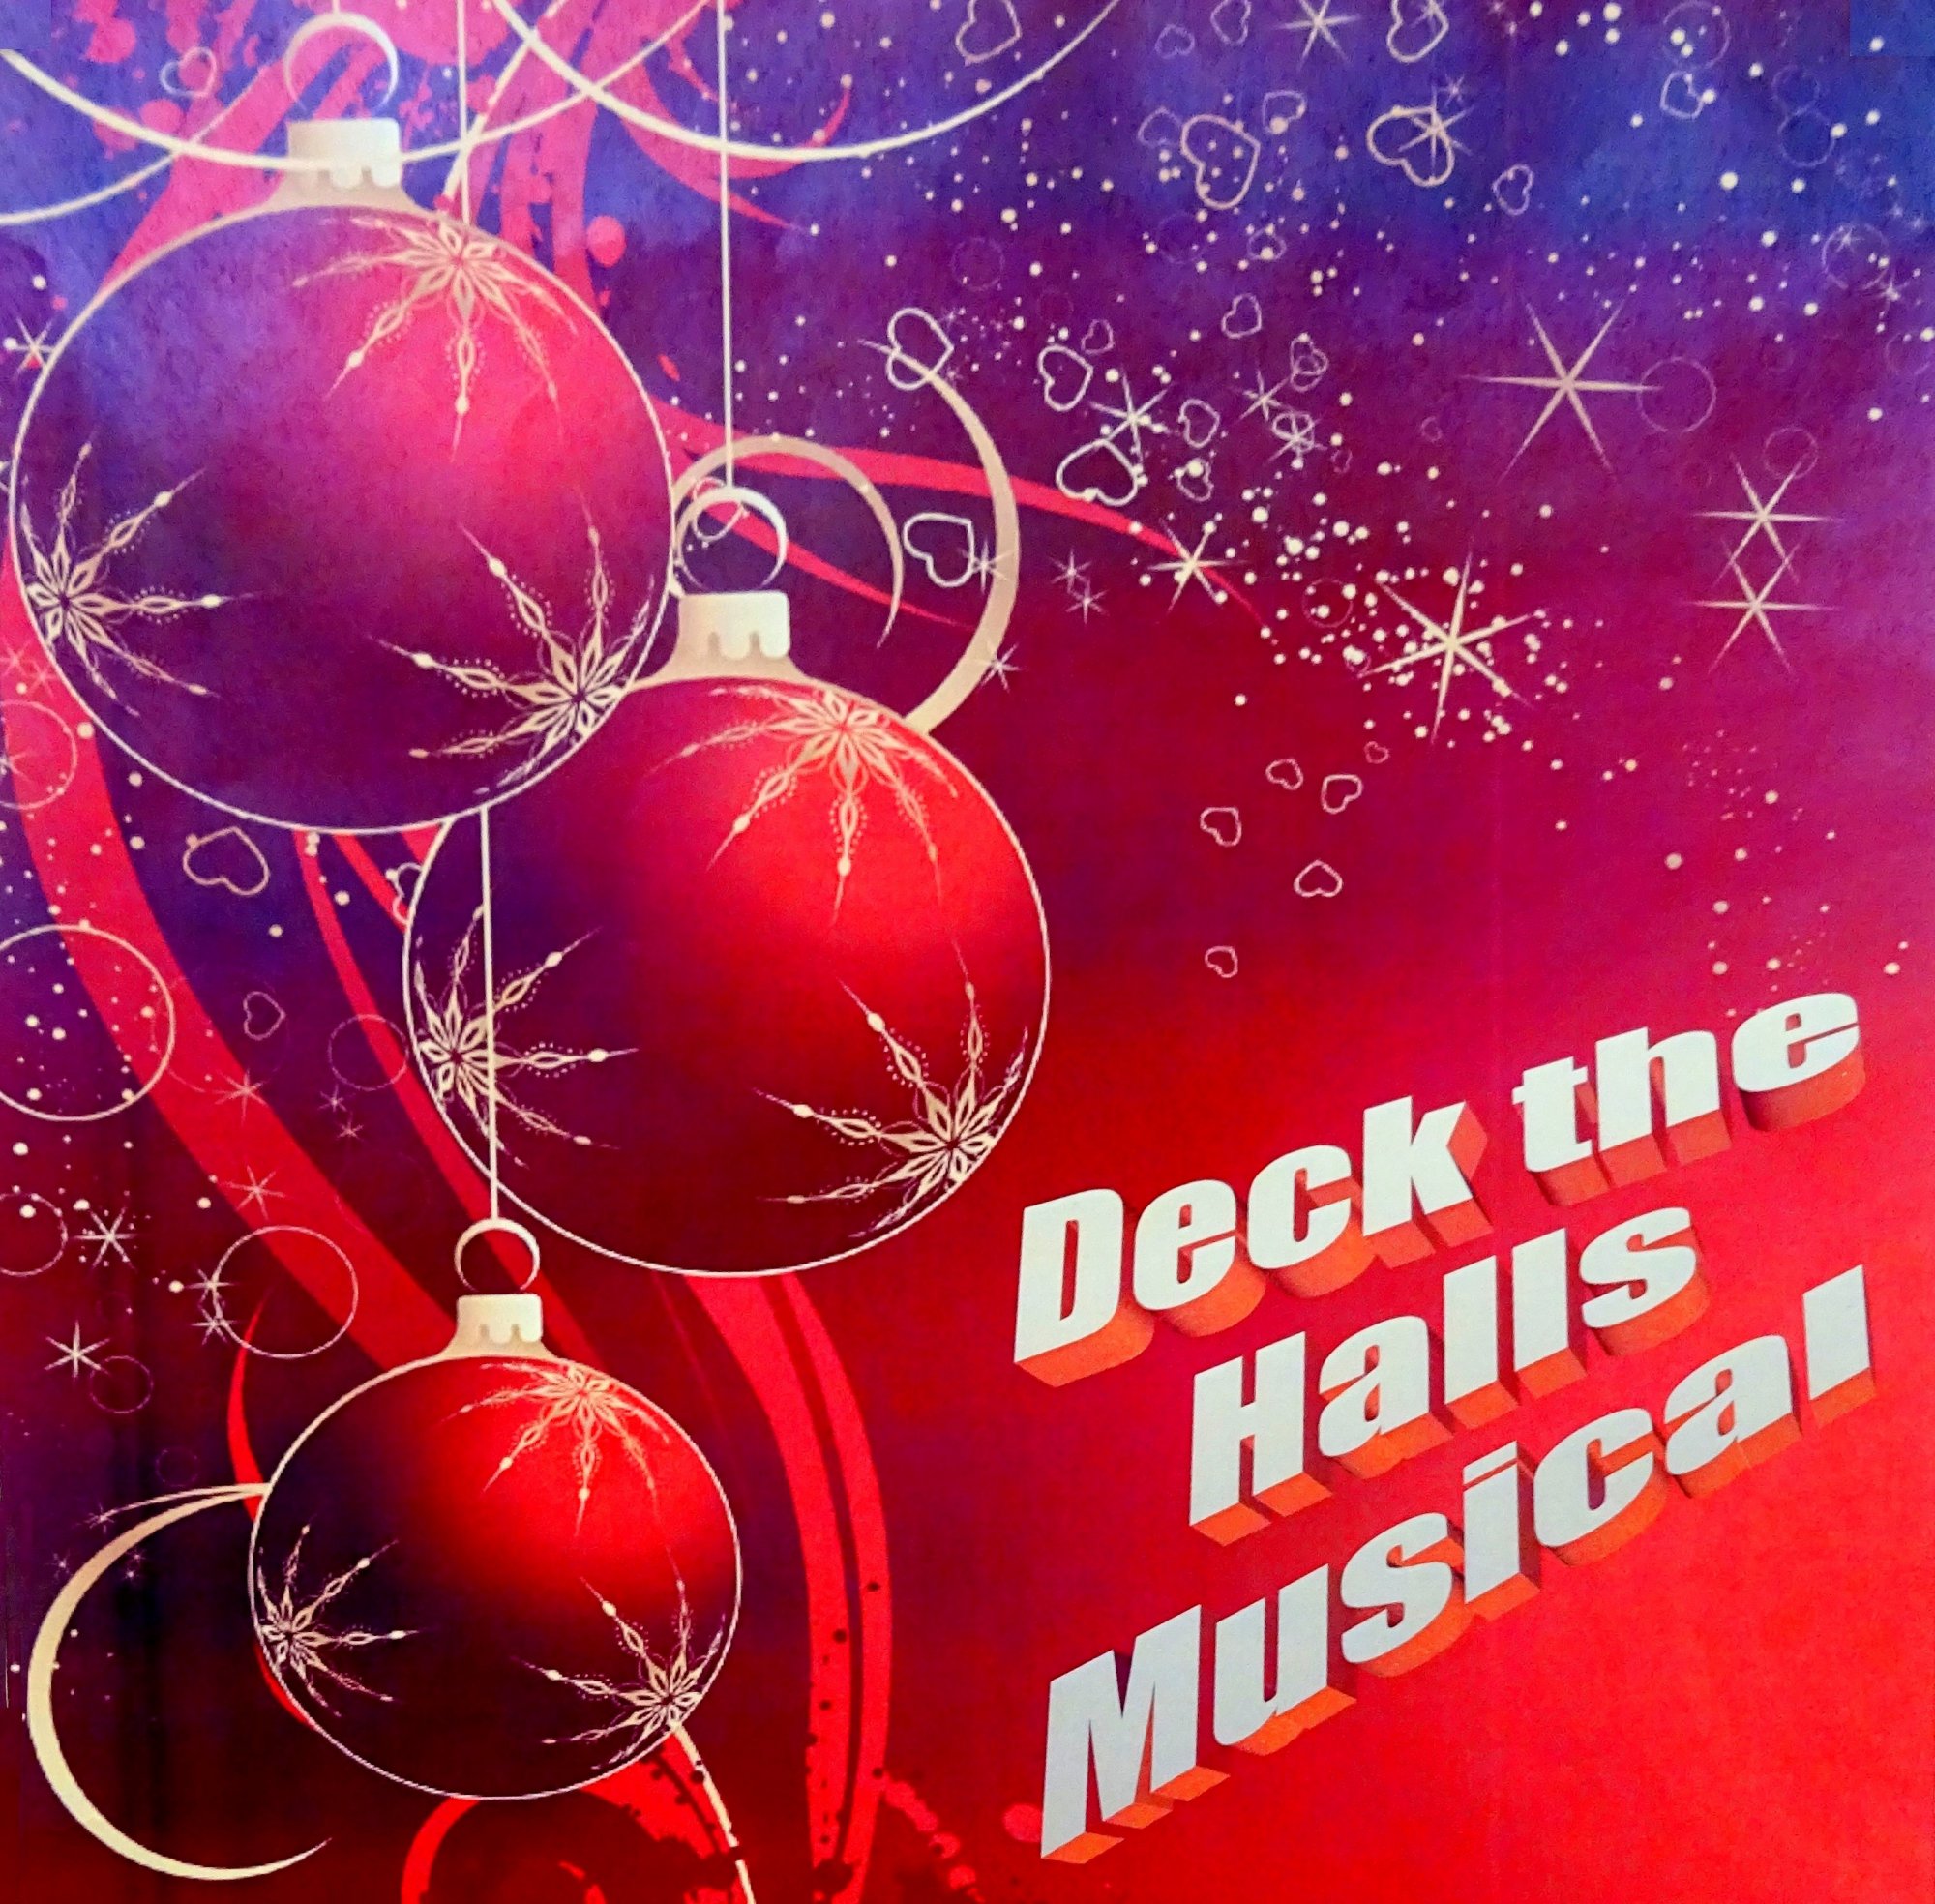 Deck the Hall Musical image from bydewey.com Deck the Halls Musical performance at VIVA Mississauga 2015